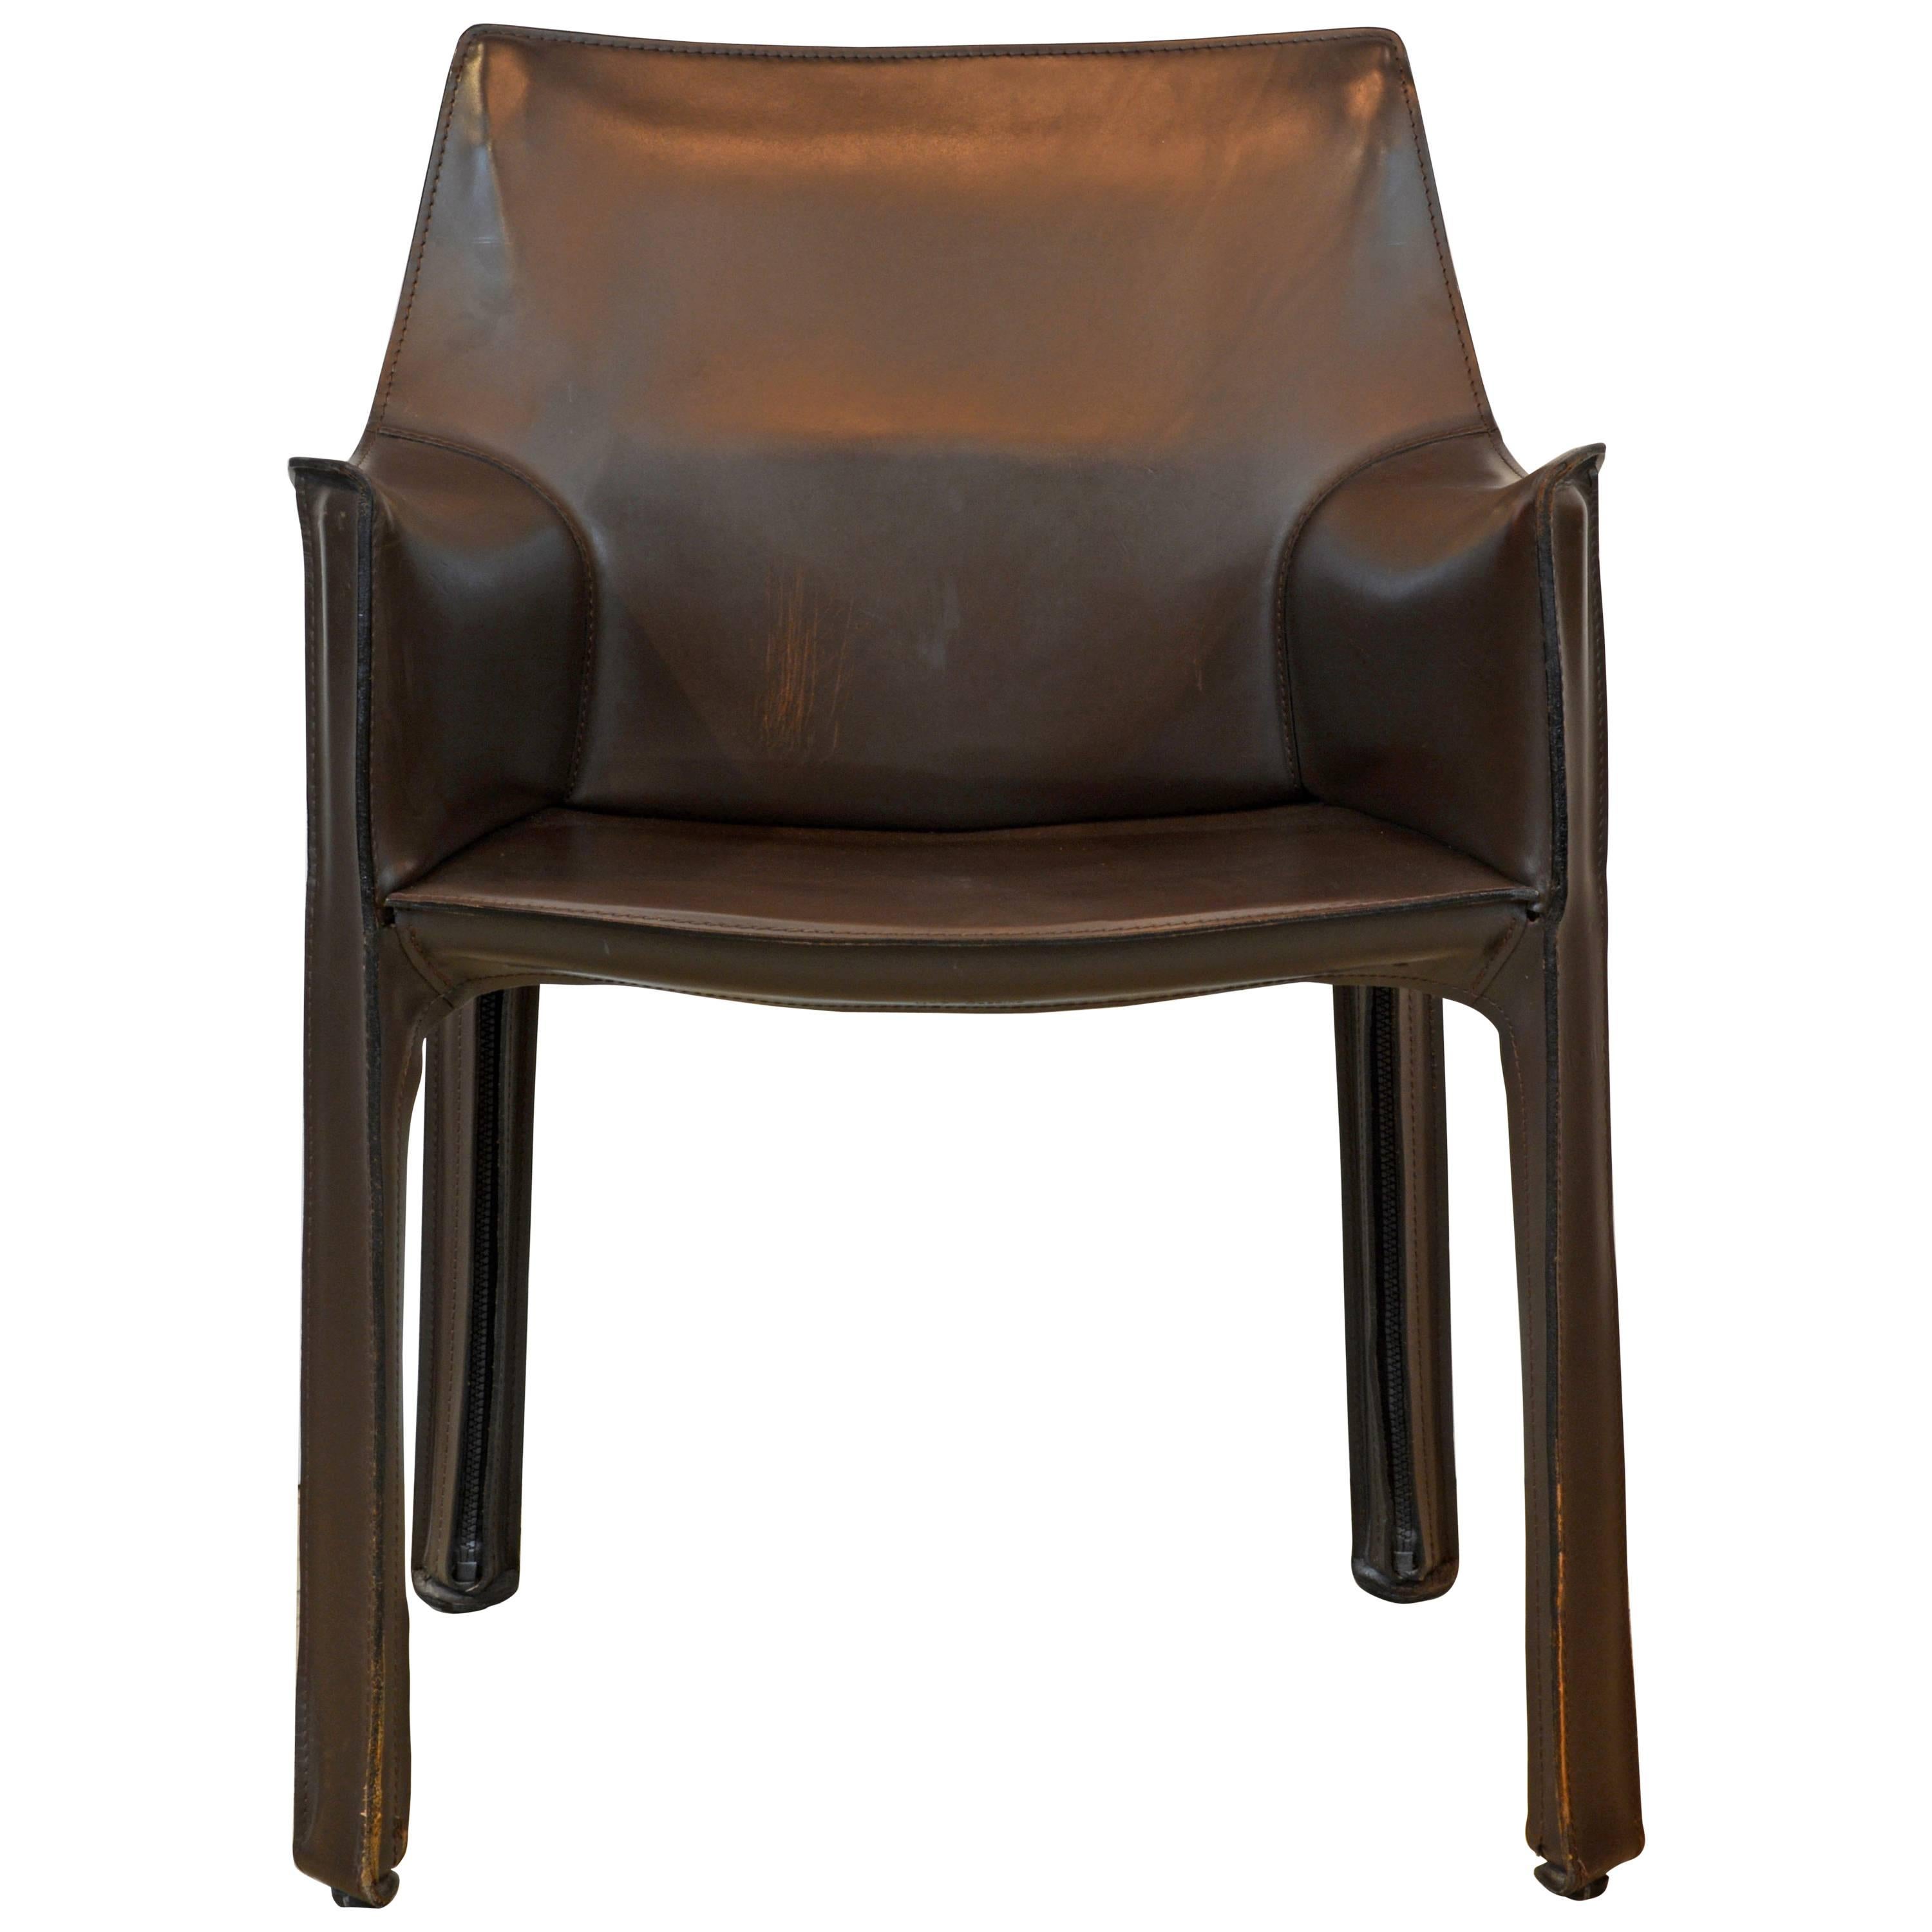 Iconic Mario Bellini Design Leather Dining or Work Chair by Cassina, Italy